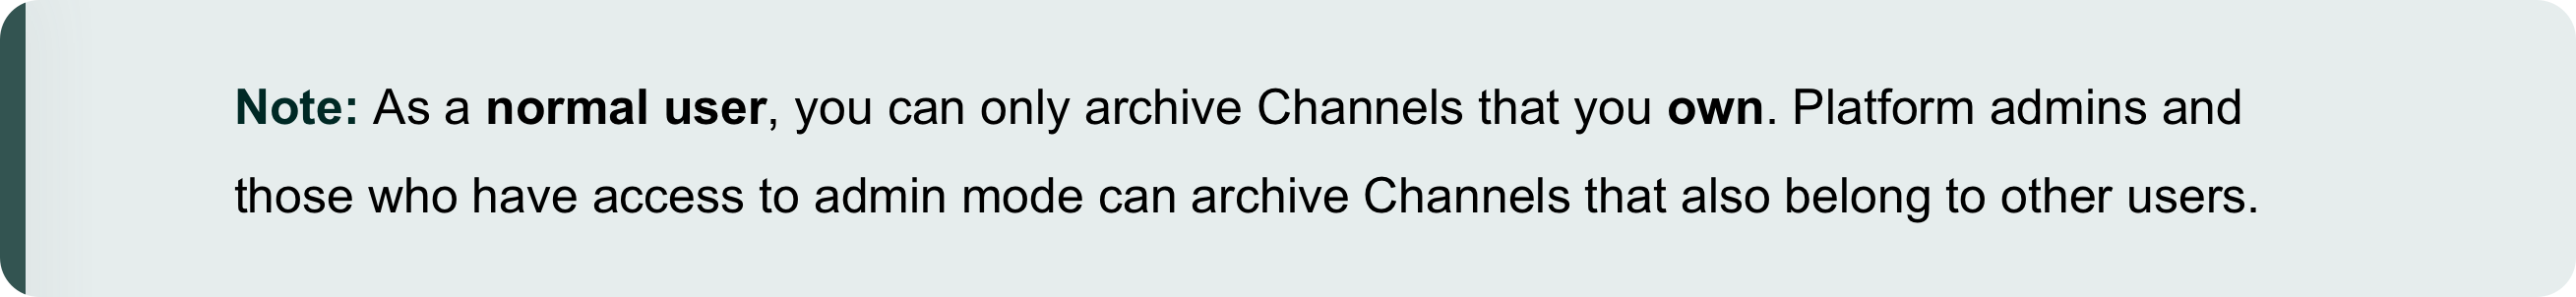 Archive_and_Unarchive_a_Channel_1.png